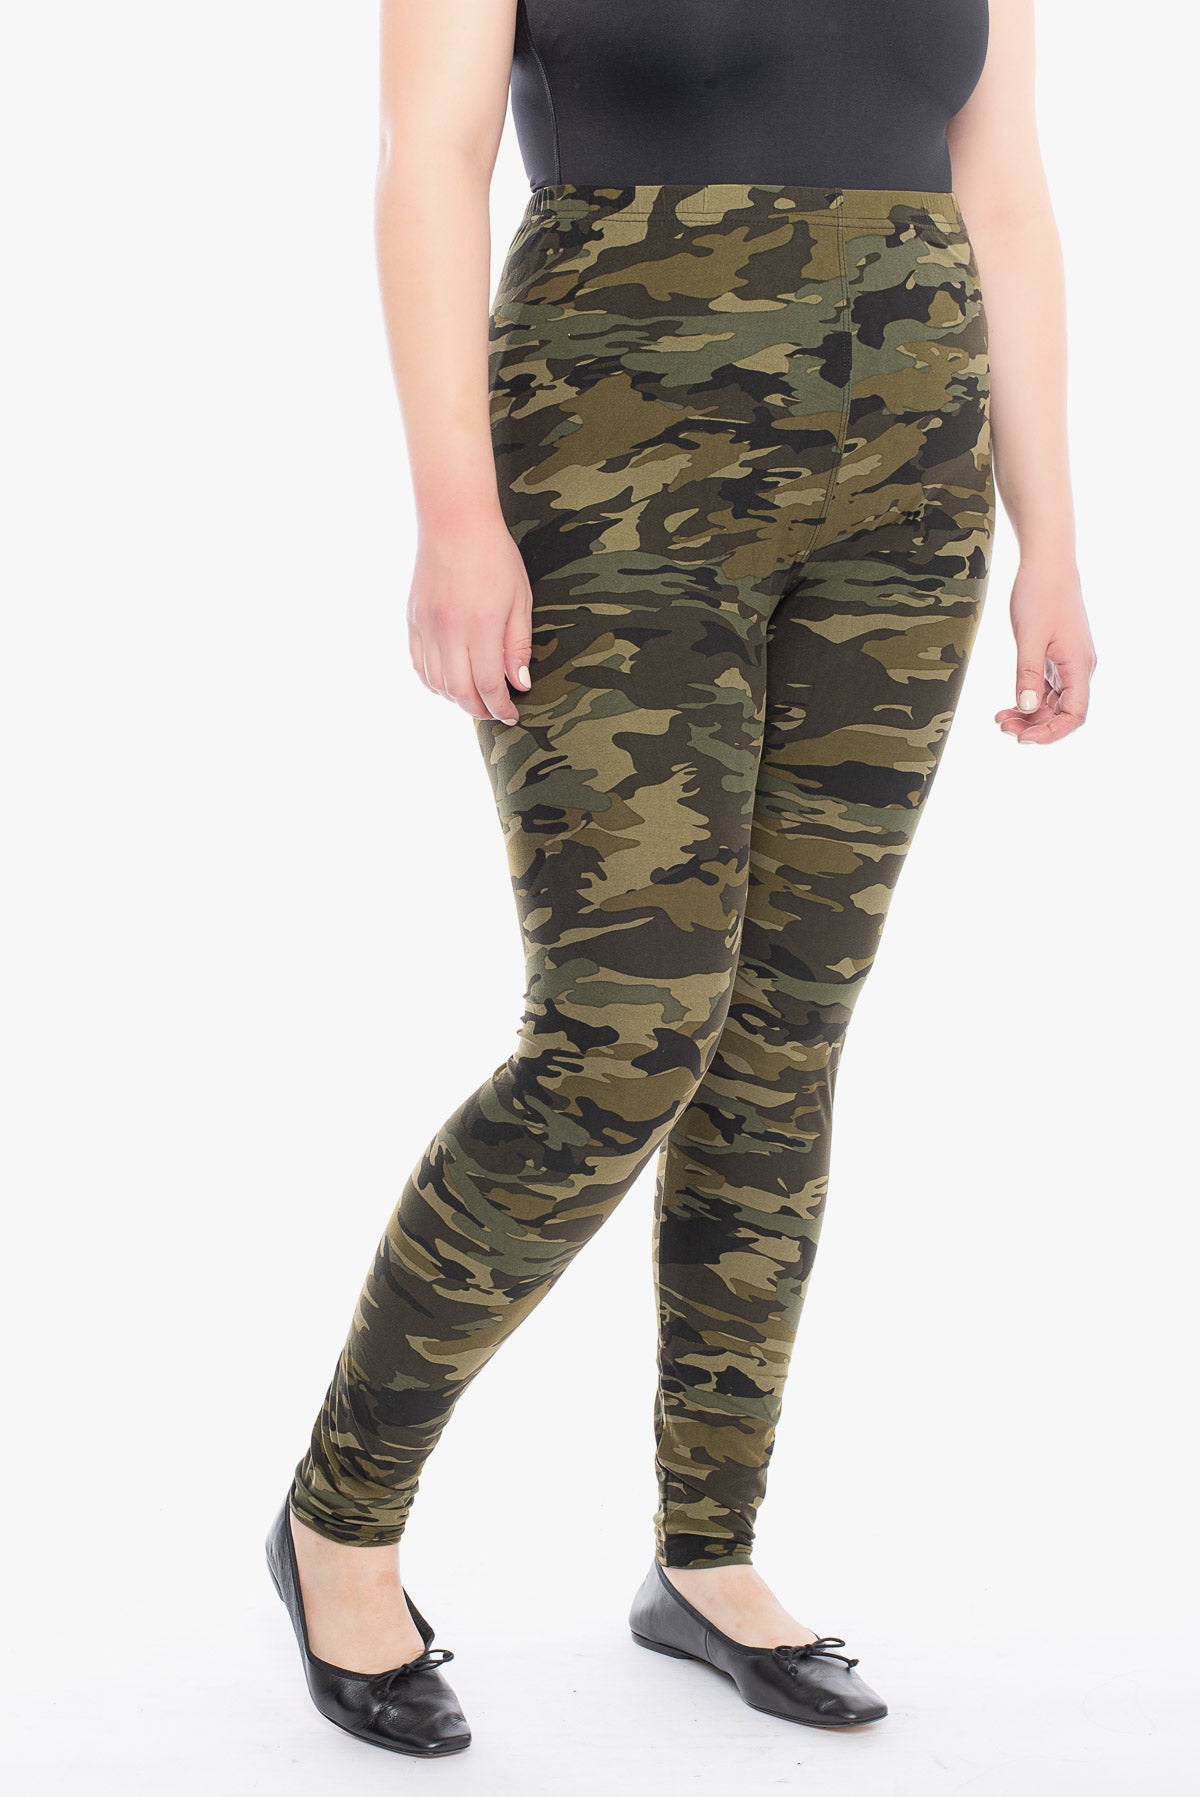 Lilly - olive camo